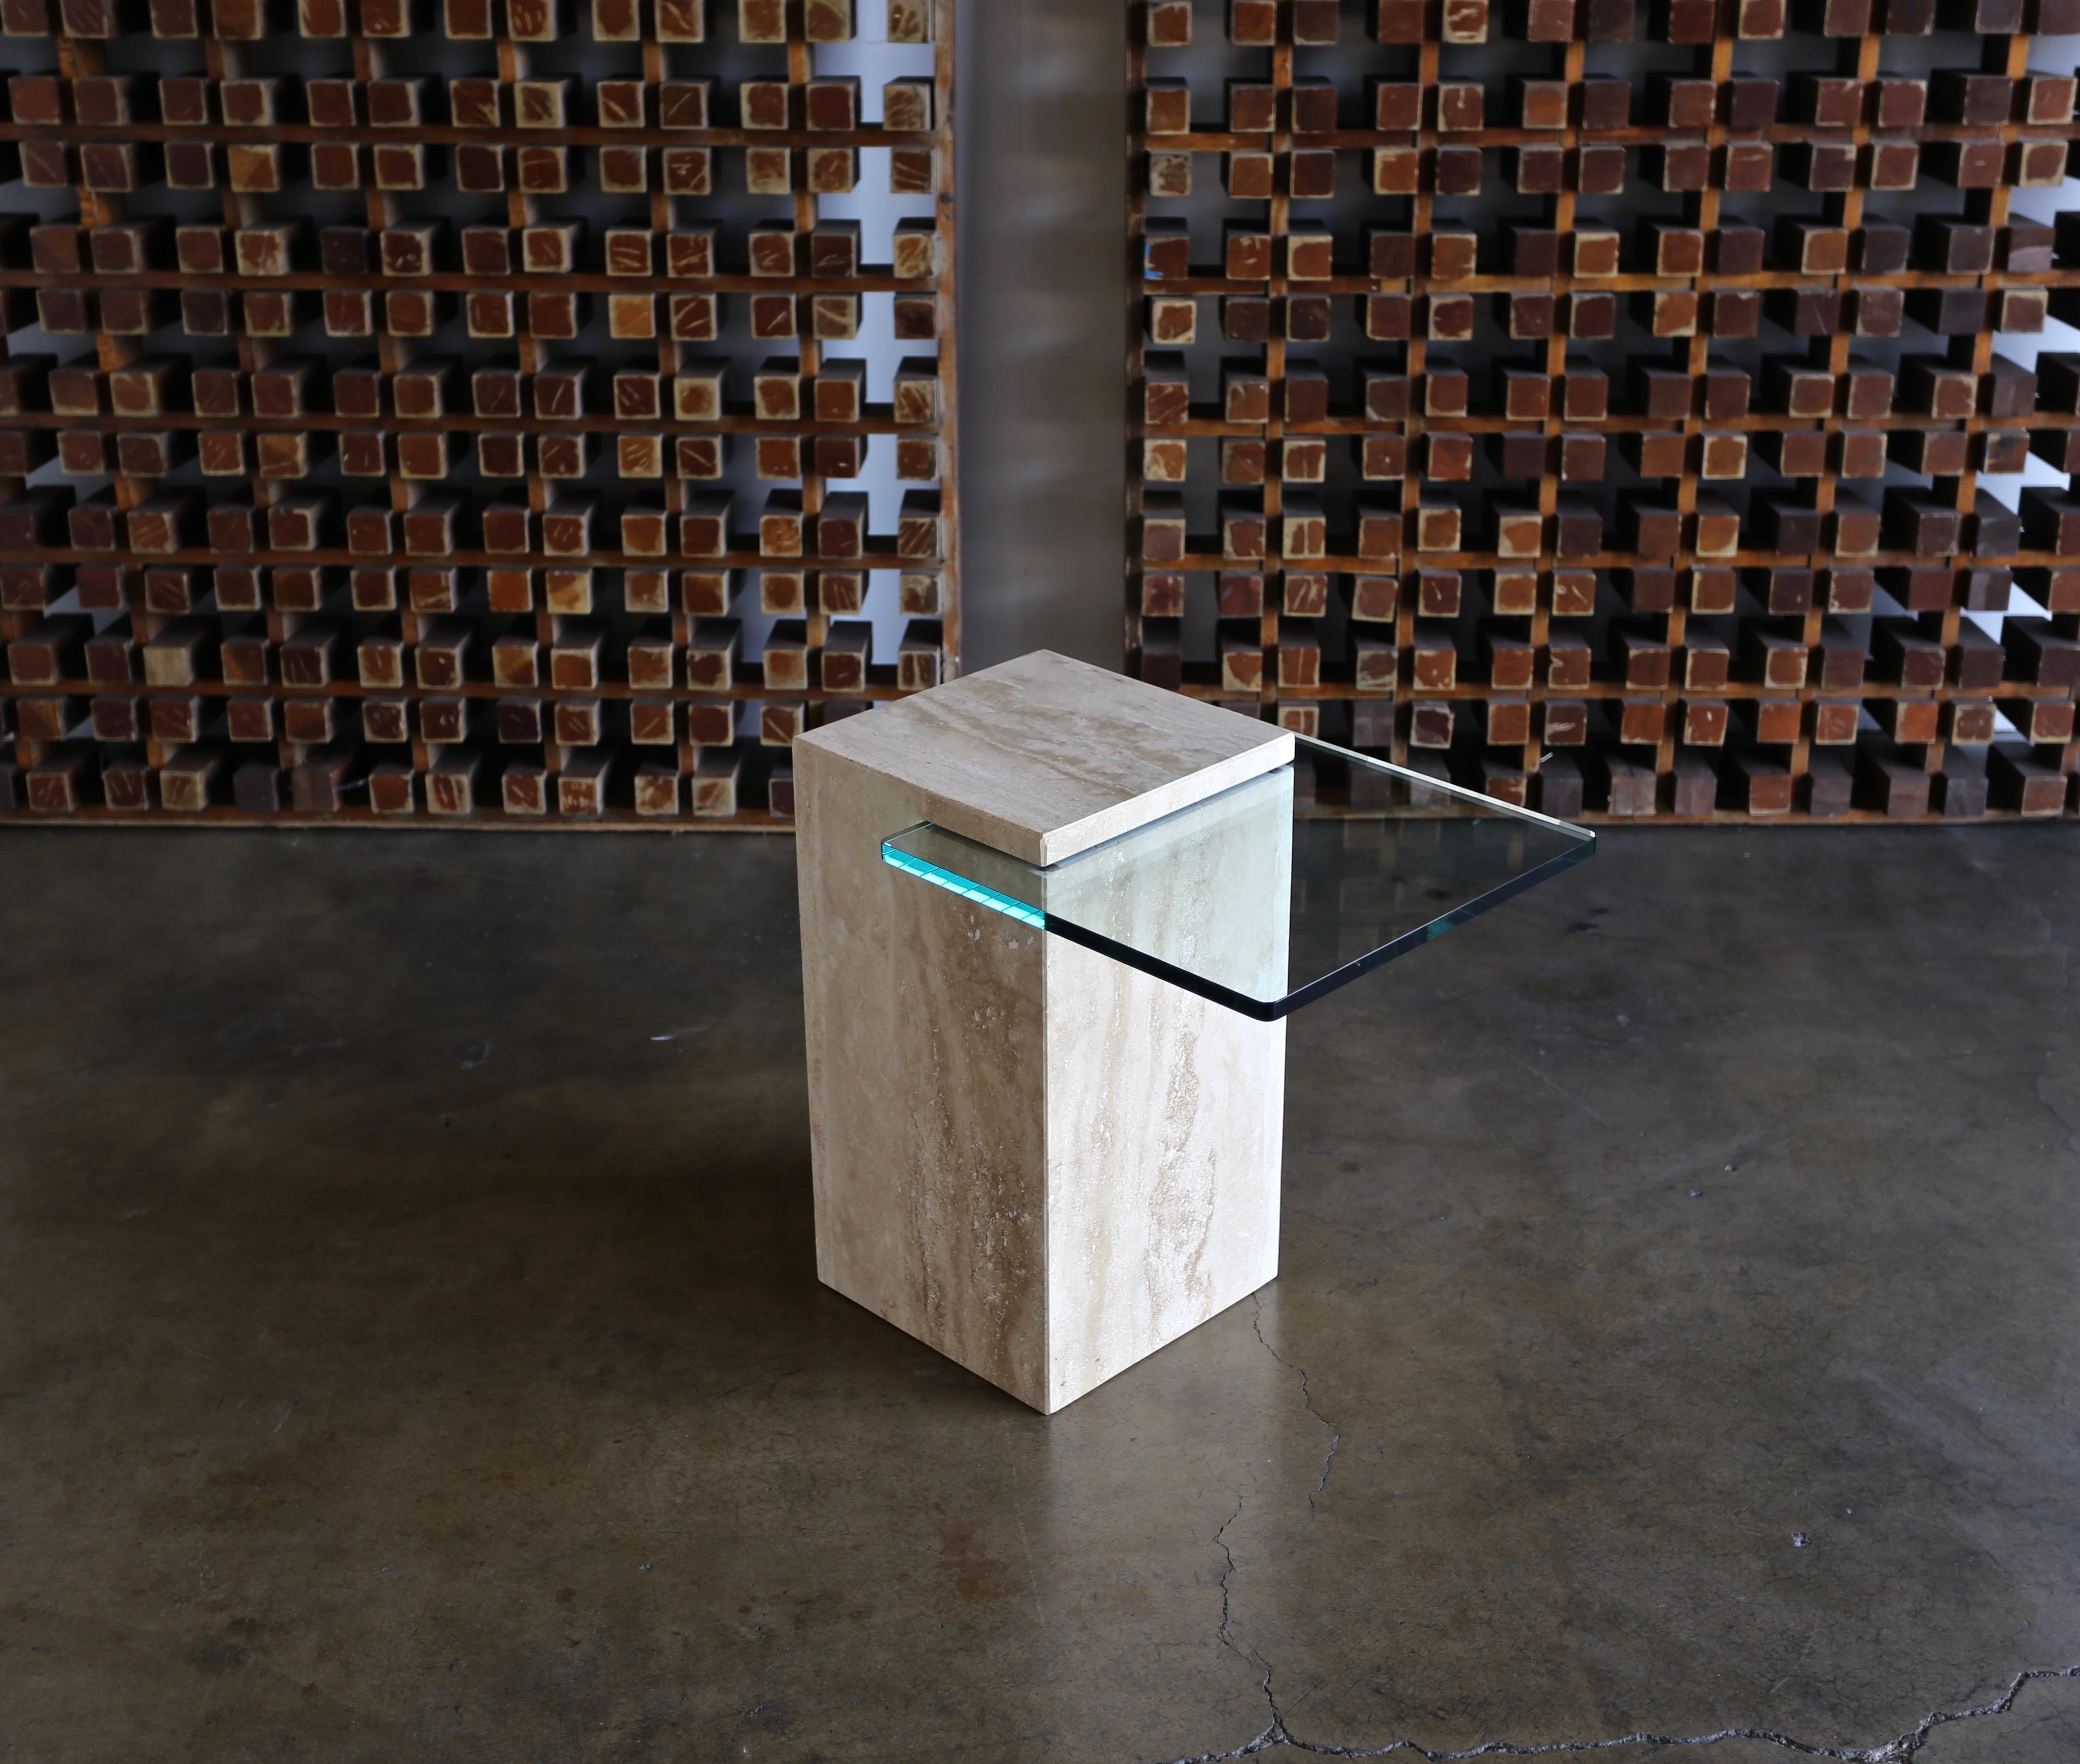 Modernist travertine and glass side table, 1970s

From the floor to the top of the glass measures 20.38